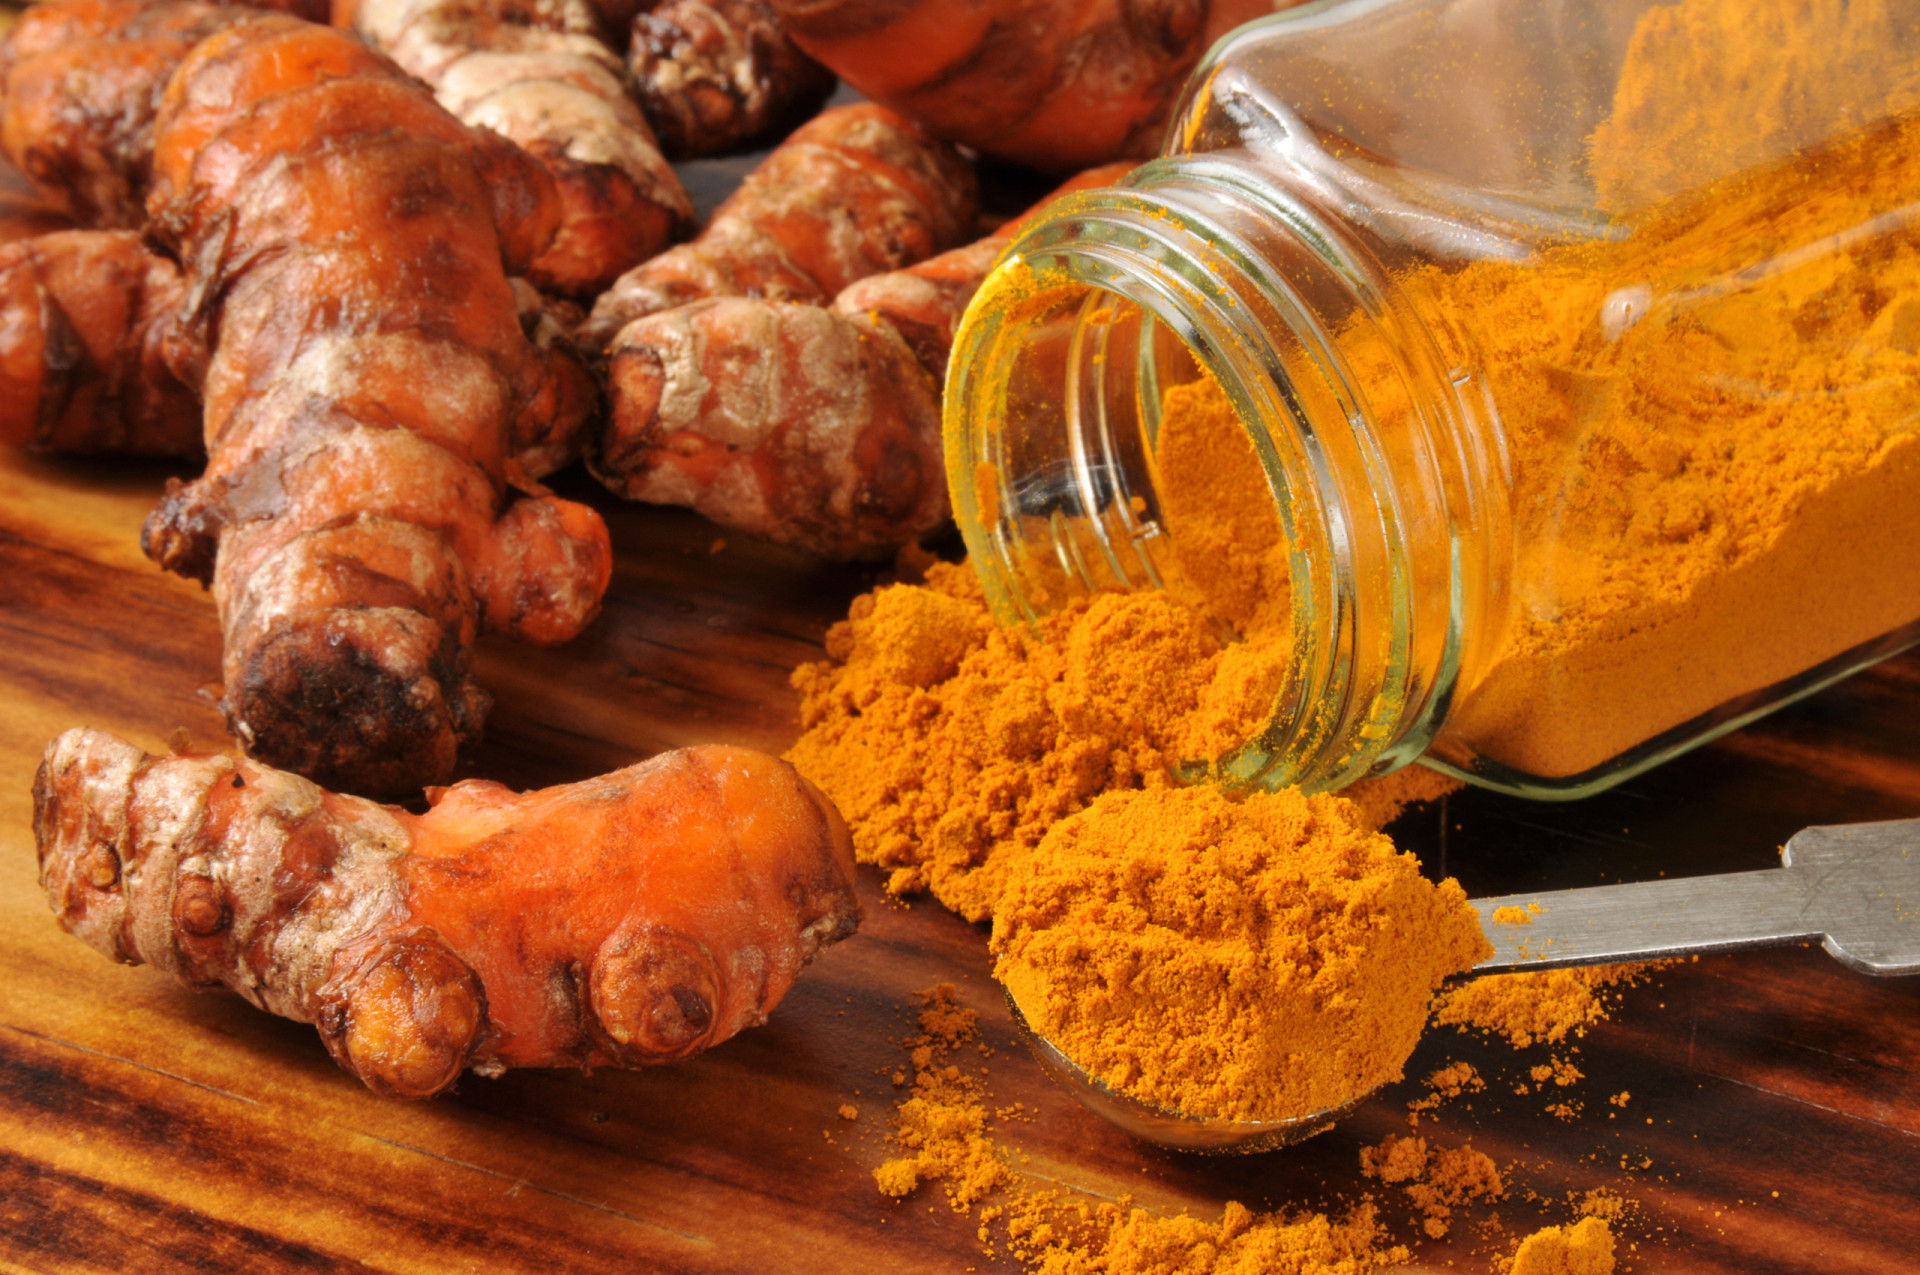 <p>Turmeric (<em>curcuma longa</em>) may potentiate the effects of antiplatelet and anticoagulant drugs. Turmeric may also increase drug levels of tacrolimus and talinolol. There is a case report of acute liver injury related to long-term use of the herb in combination with etoricoxib.</p><p><a href="https://www.msn.com/en-us/community/channel/vid-7xx8mnucu55yw63we9va2gwr7uihbxwc68fxqp25x6tg4ftibpra?cvid=94631541bc0f4f89bfd59158d696ad7e">Follow us and access great exclusive content every day</a></p>